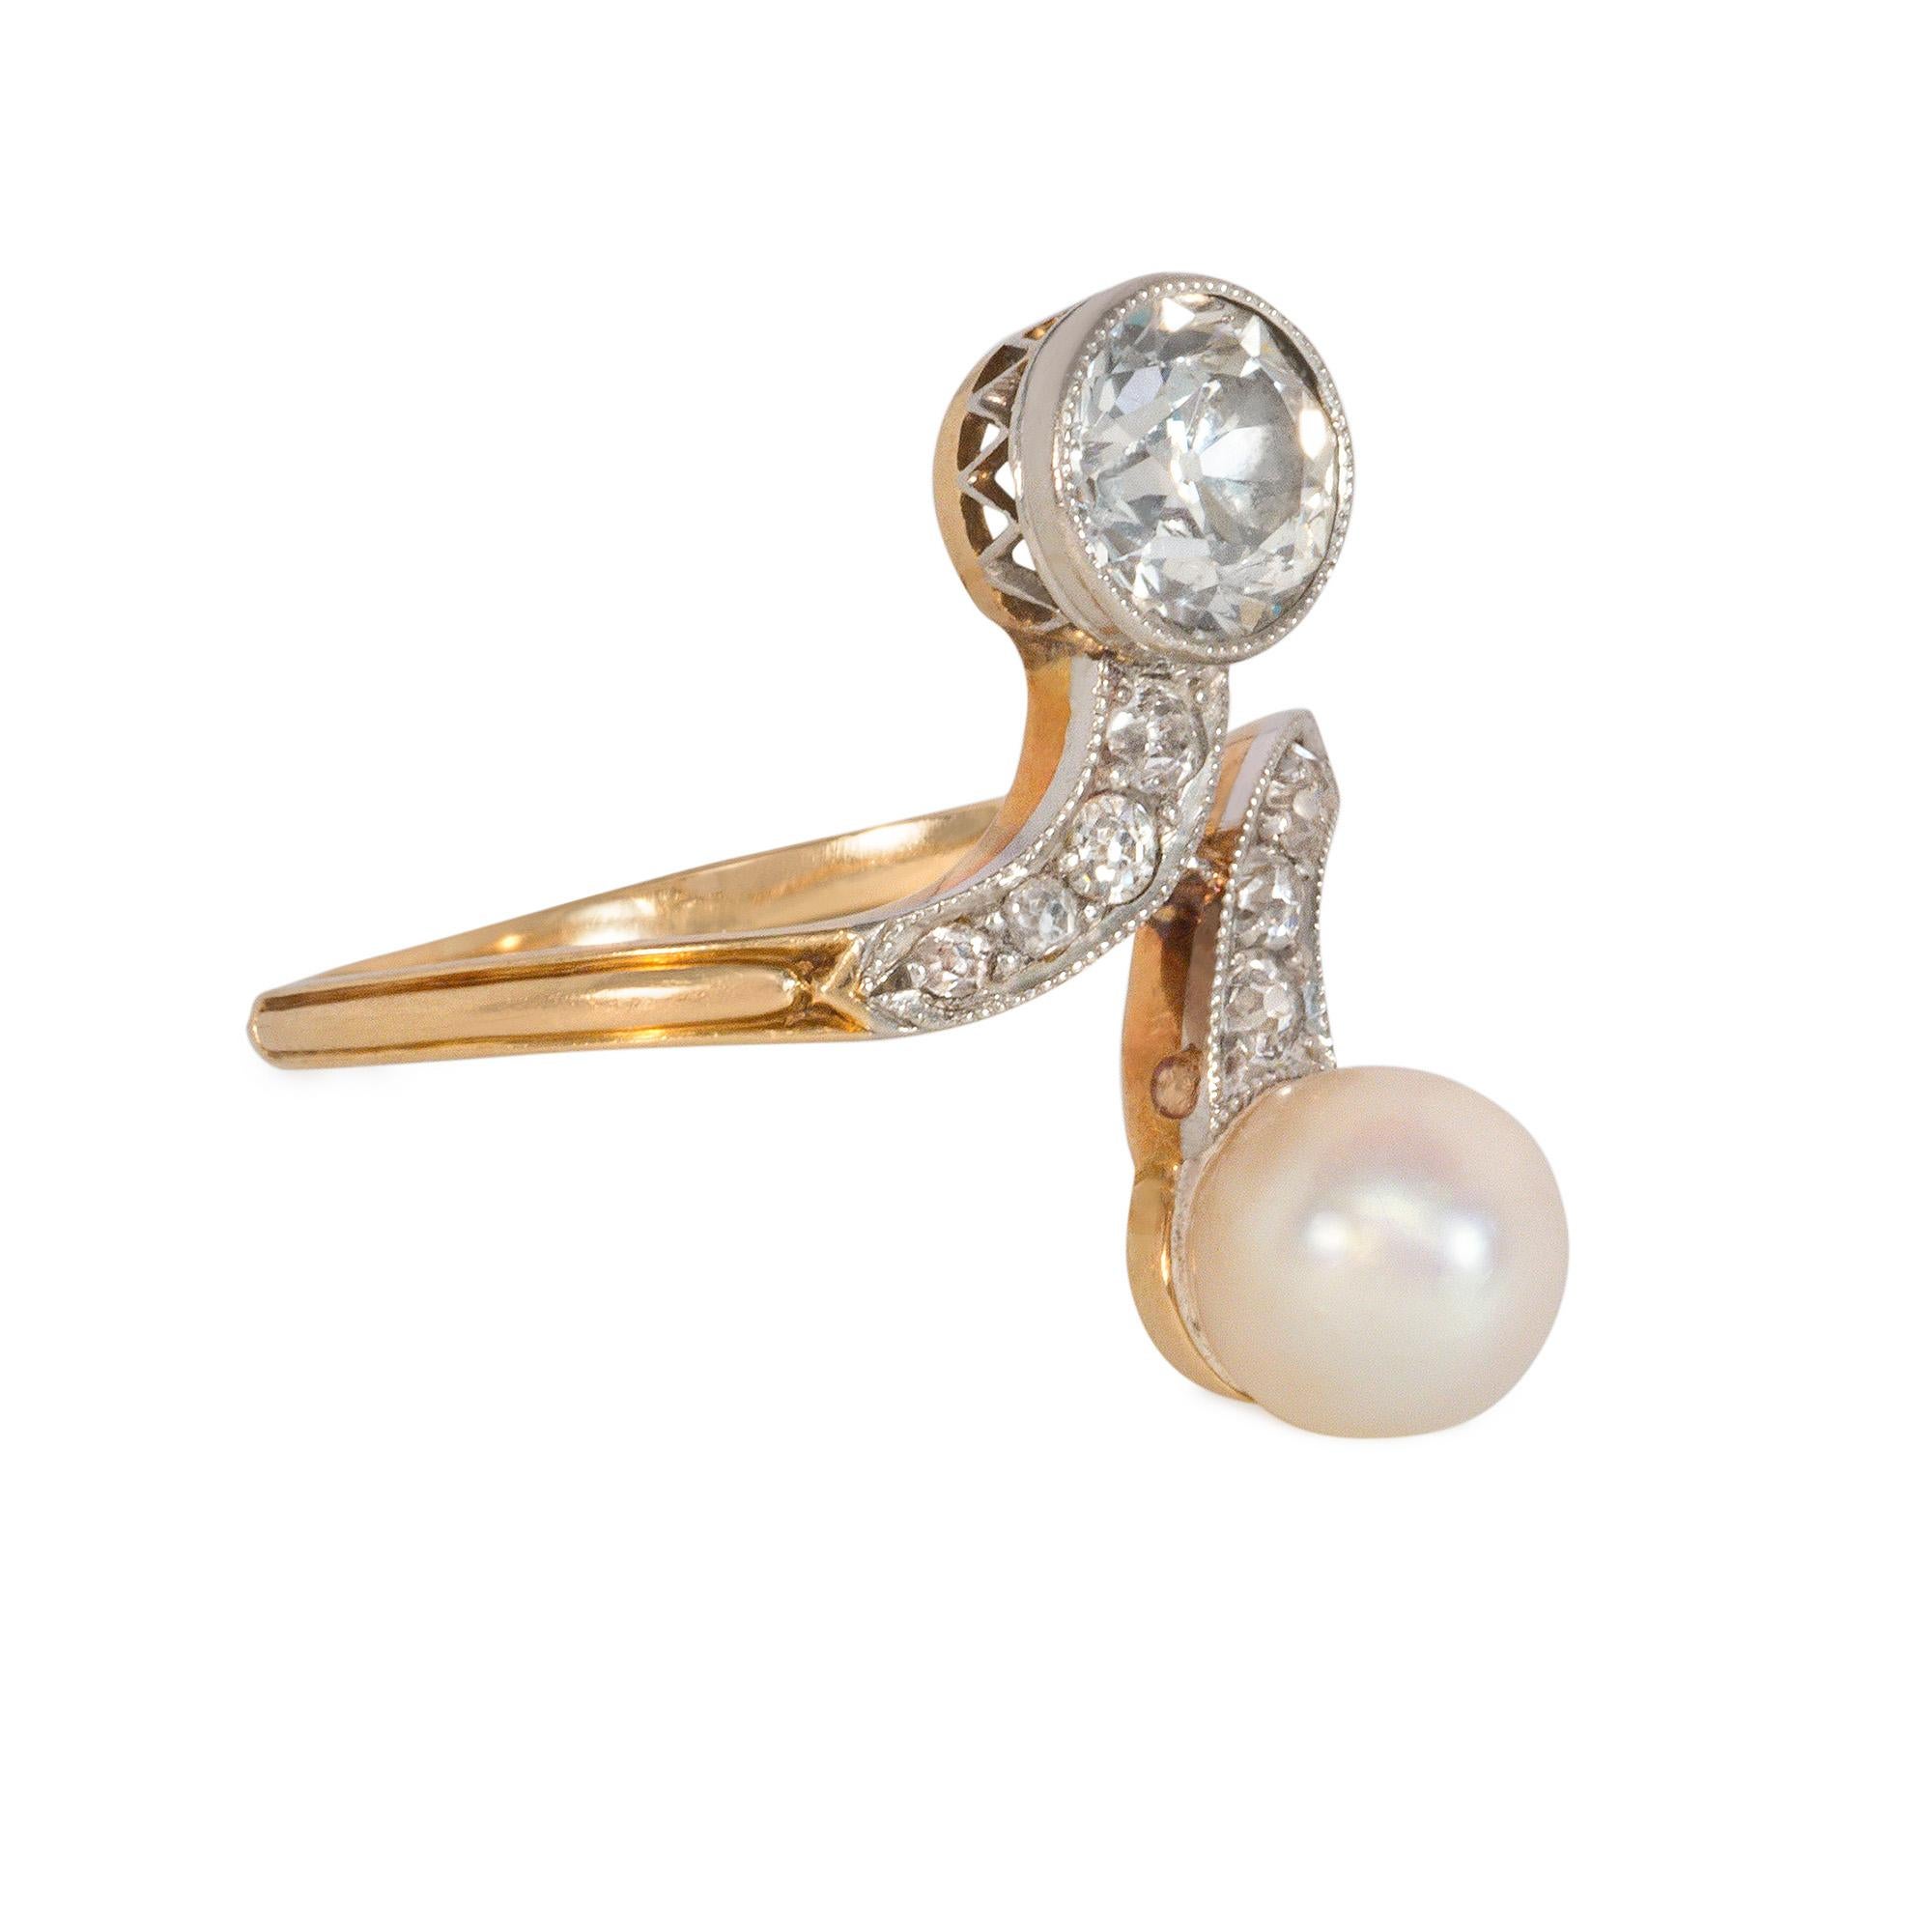 An Edwardian diamond Toi et Moi ring of bypass design set with diamonds and a pearl, in platinum and 18k gold.  Atw 1.10 ct.  Face-up vertical measurement from diamond to pearl: 21mm

Current ring size: US 6.5; please contact us with re-sizing